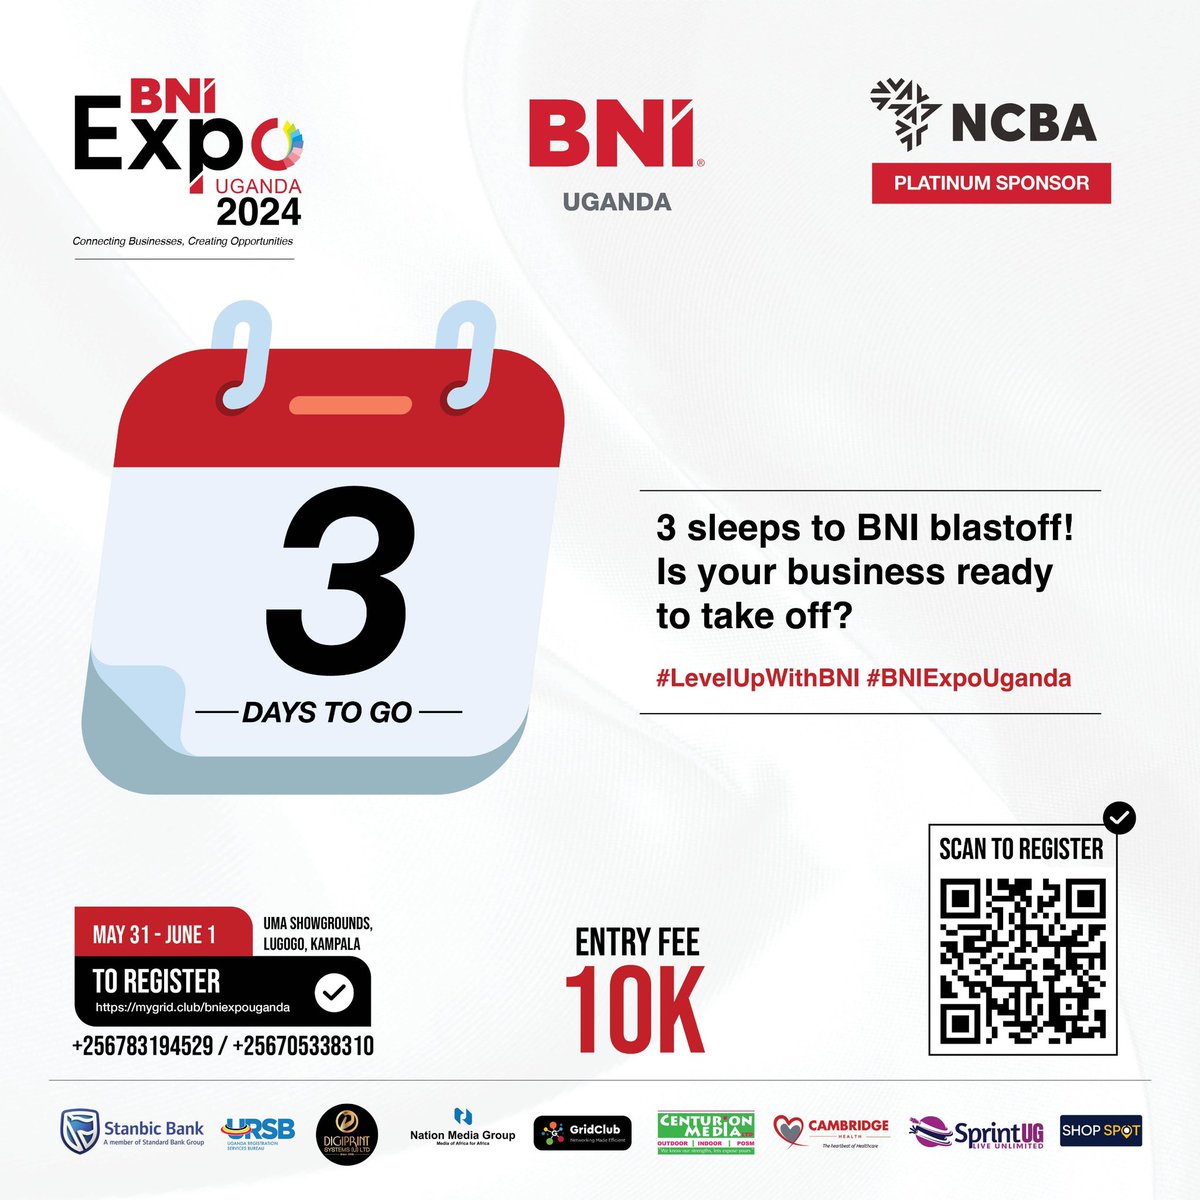 Just 3 more days until the #BNIExpo2024. Remember that entrance tax is just 10k per day. Call 0783194529/ 0705338310 for any inquiries you might have.